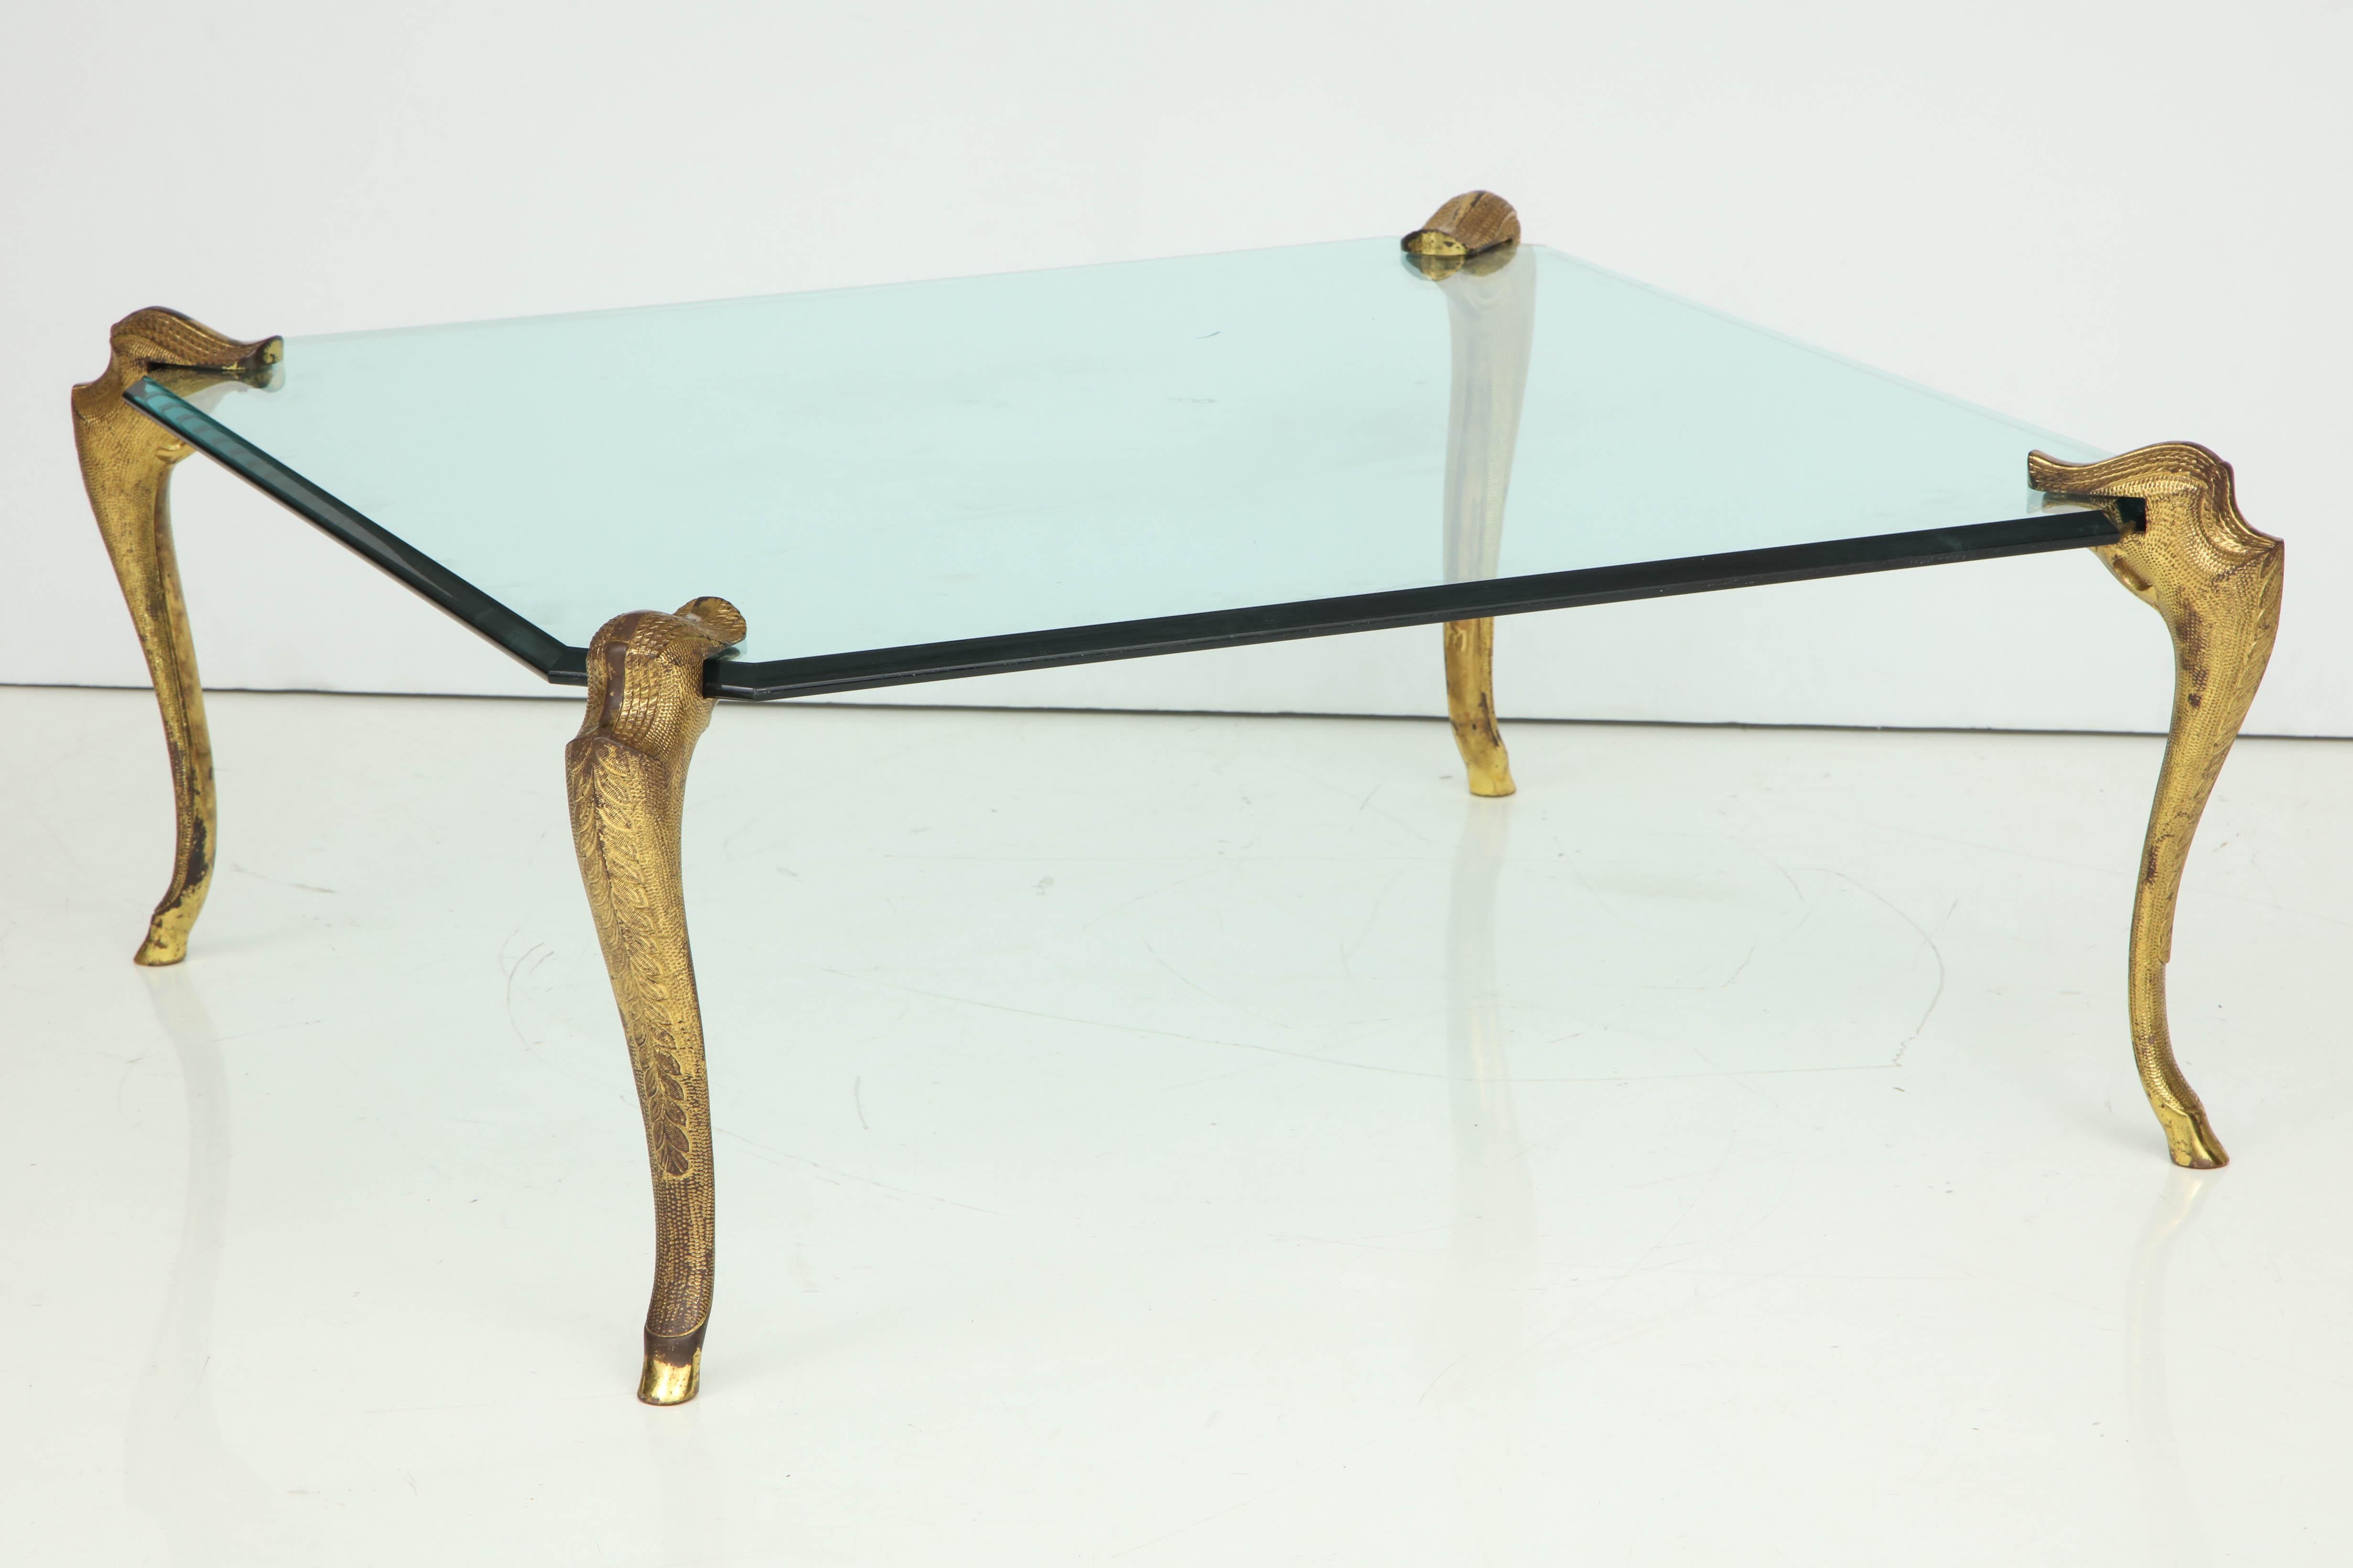 A stunning square cocktail table attributed to the decorative hardware firm, P.E. Guerin, The thick glass top is supported by four gilt bronze 